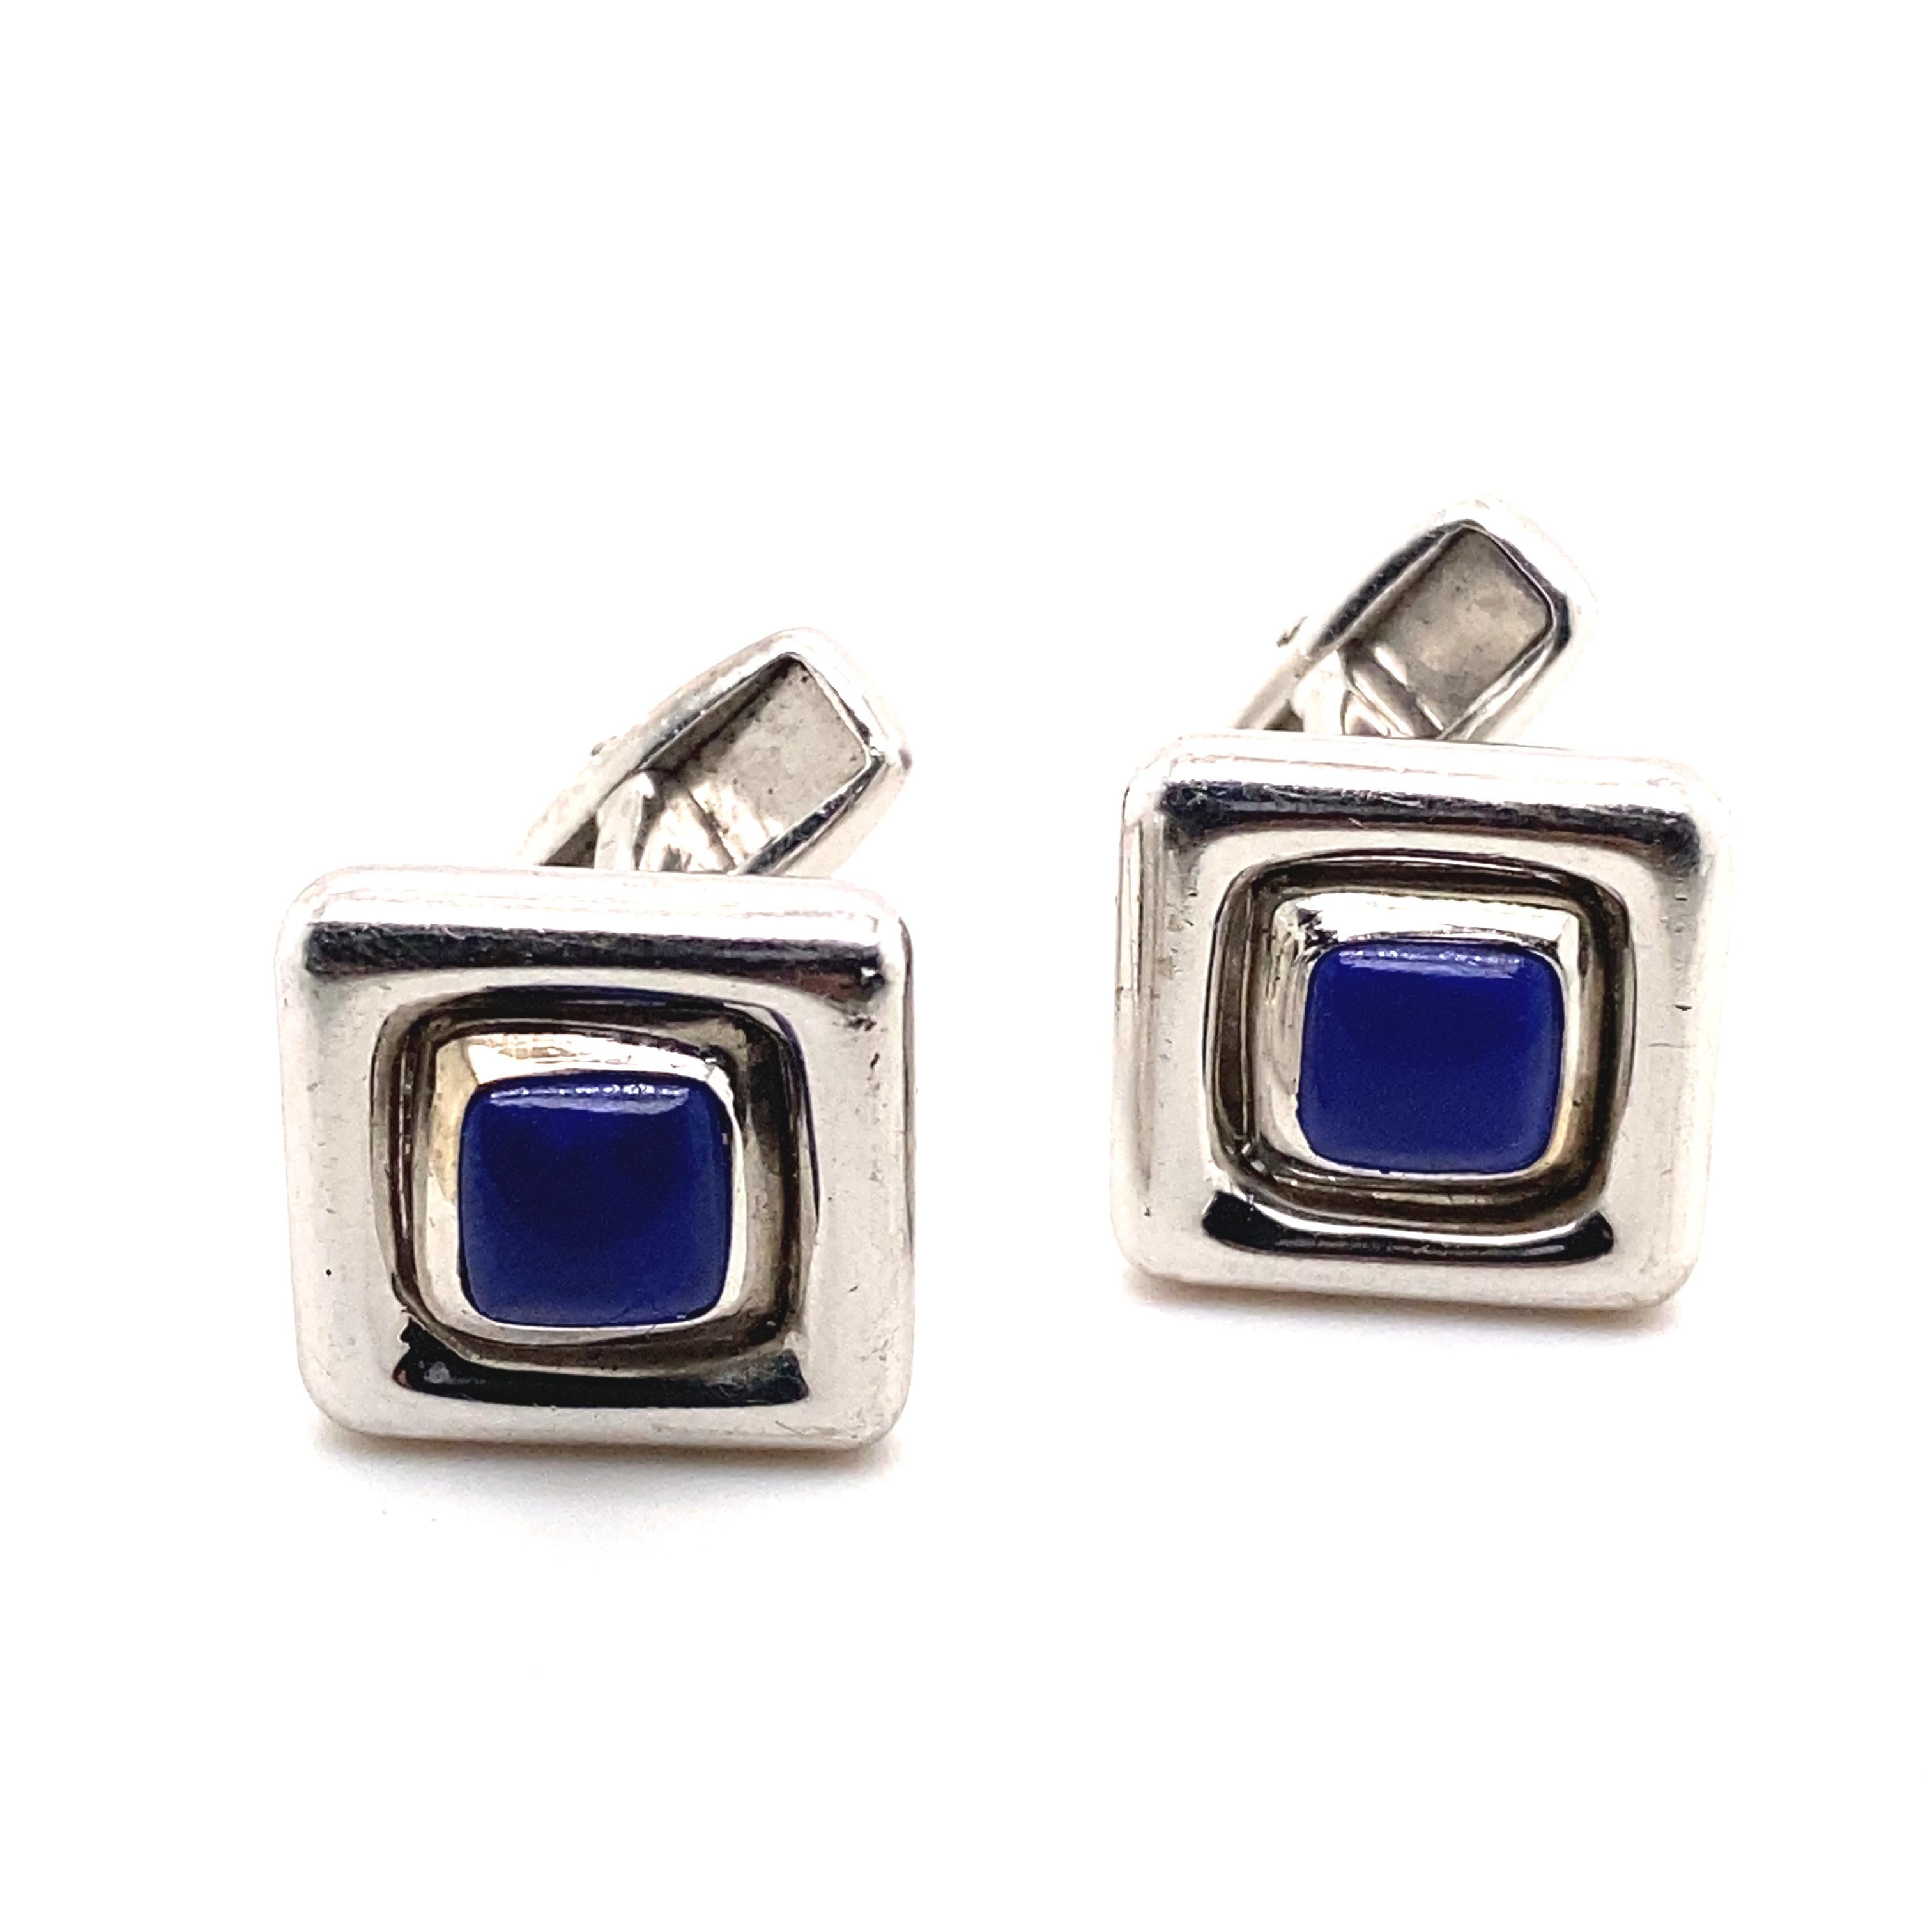 A pair of vintage Chopard diamond lapis rotating cufflinks in 18 karat white gold, circa 2000.

These smart vintage cufflinks crafted in 18 karat white gold feature two squares with gently curved corners each with a cleverly interchangeable centre